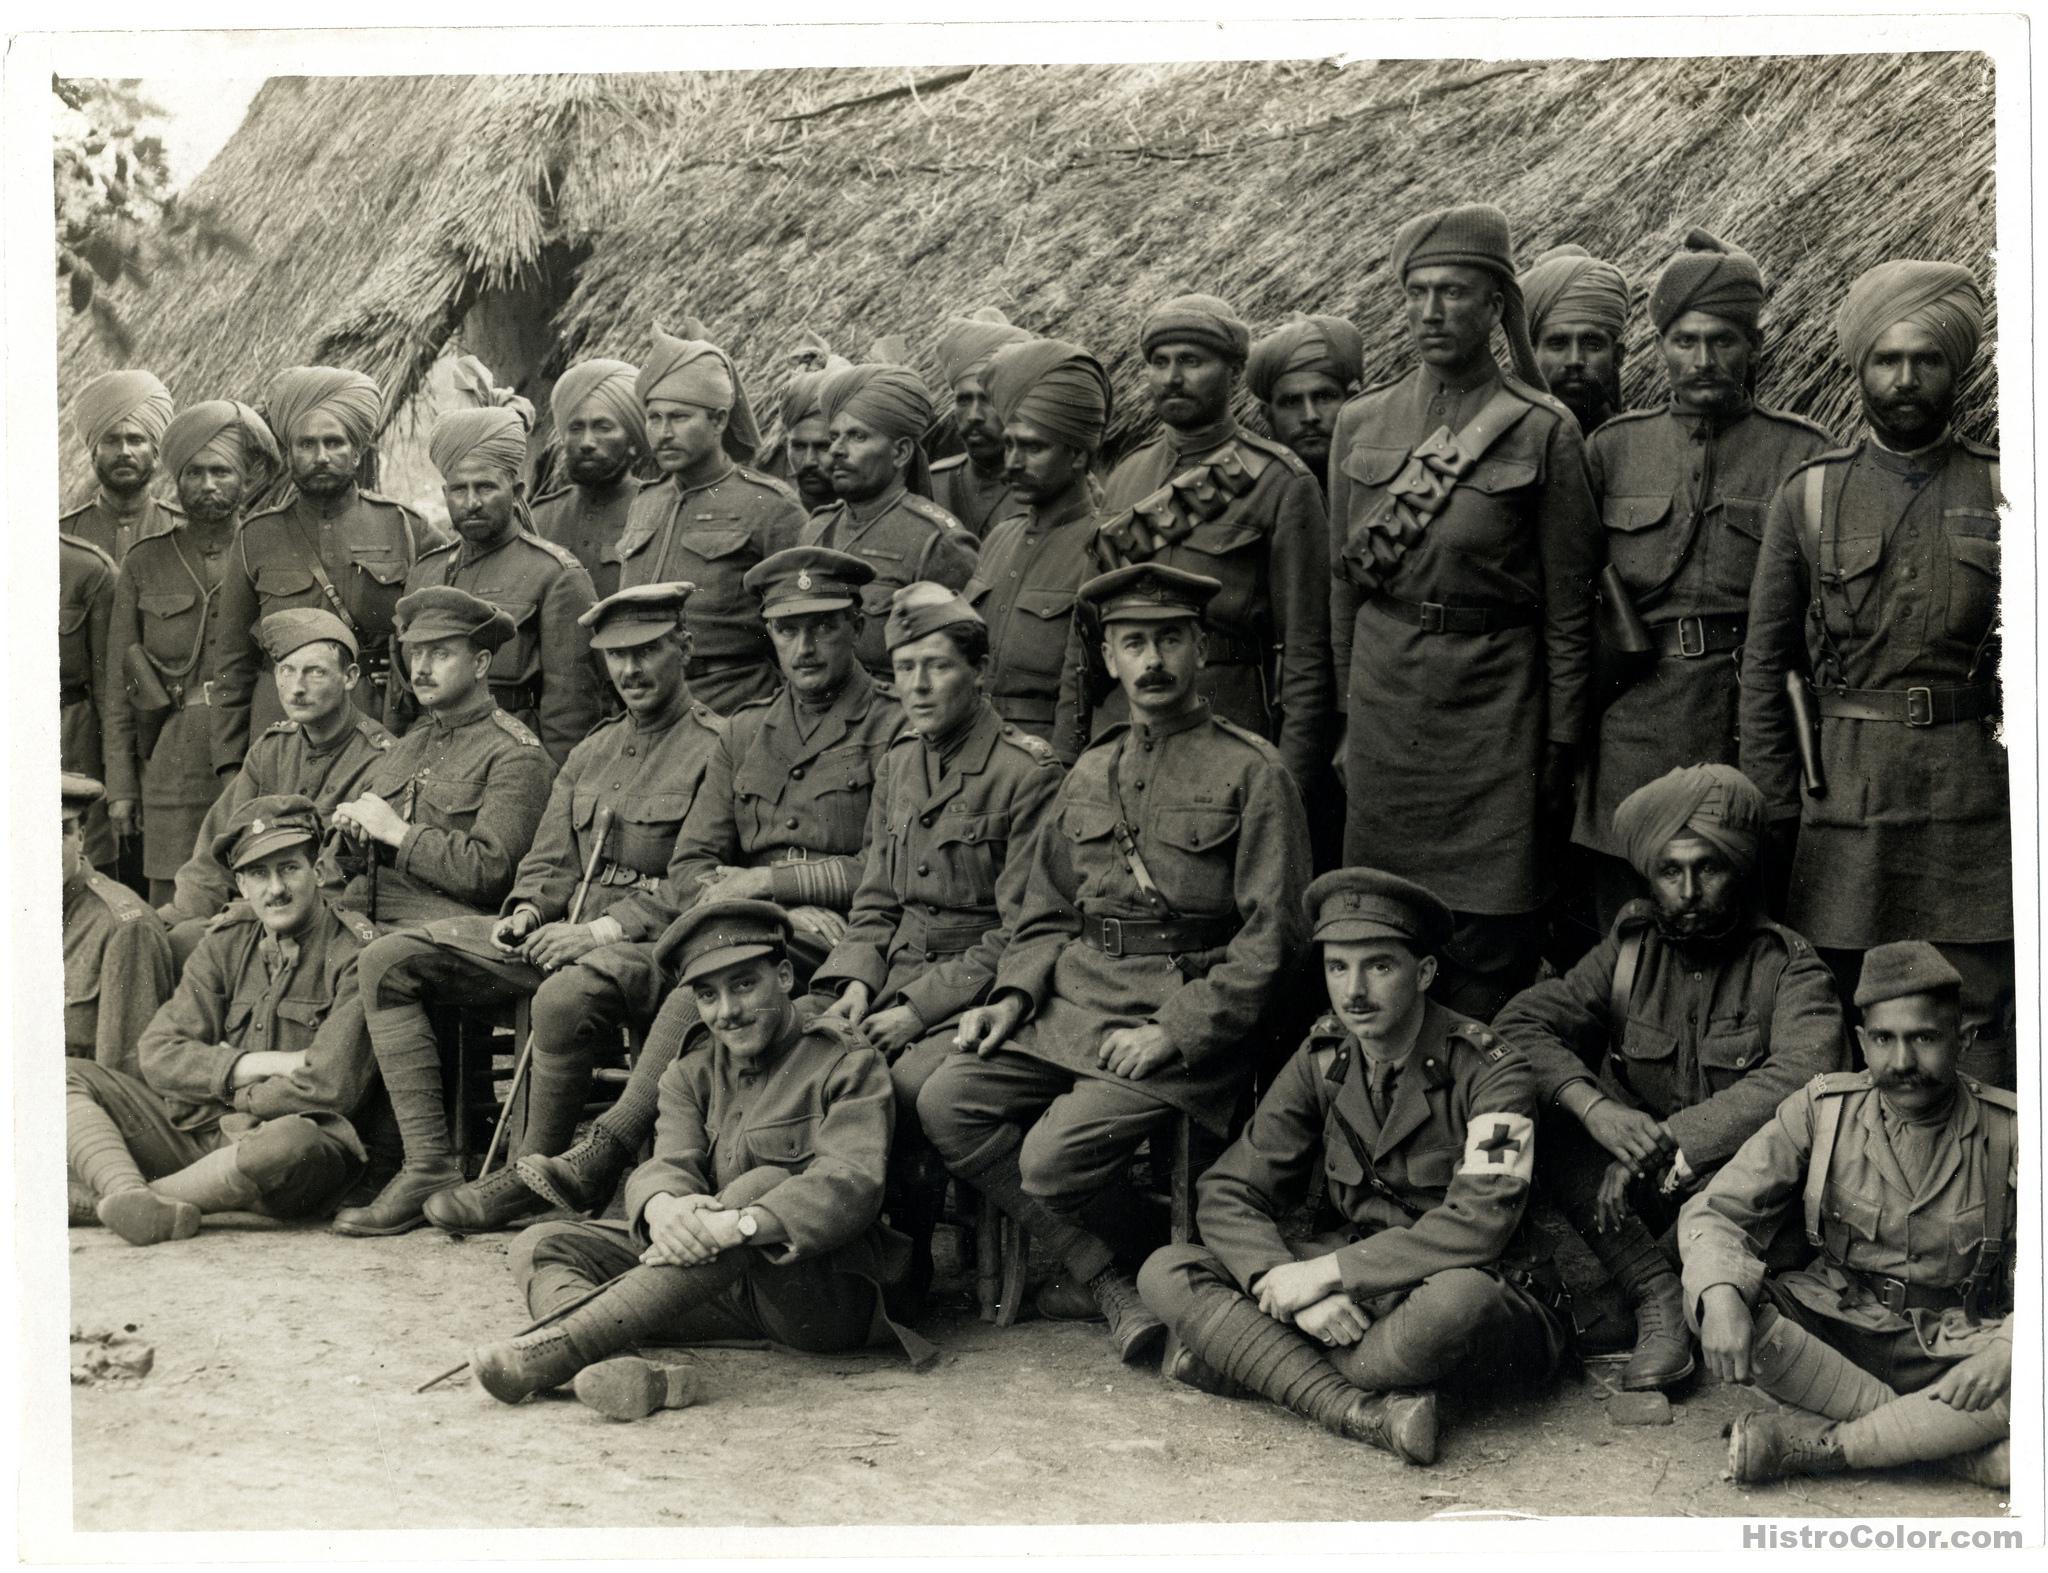 Indian soldiers of WW1